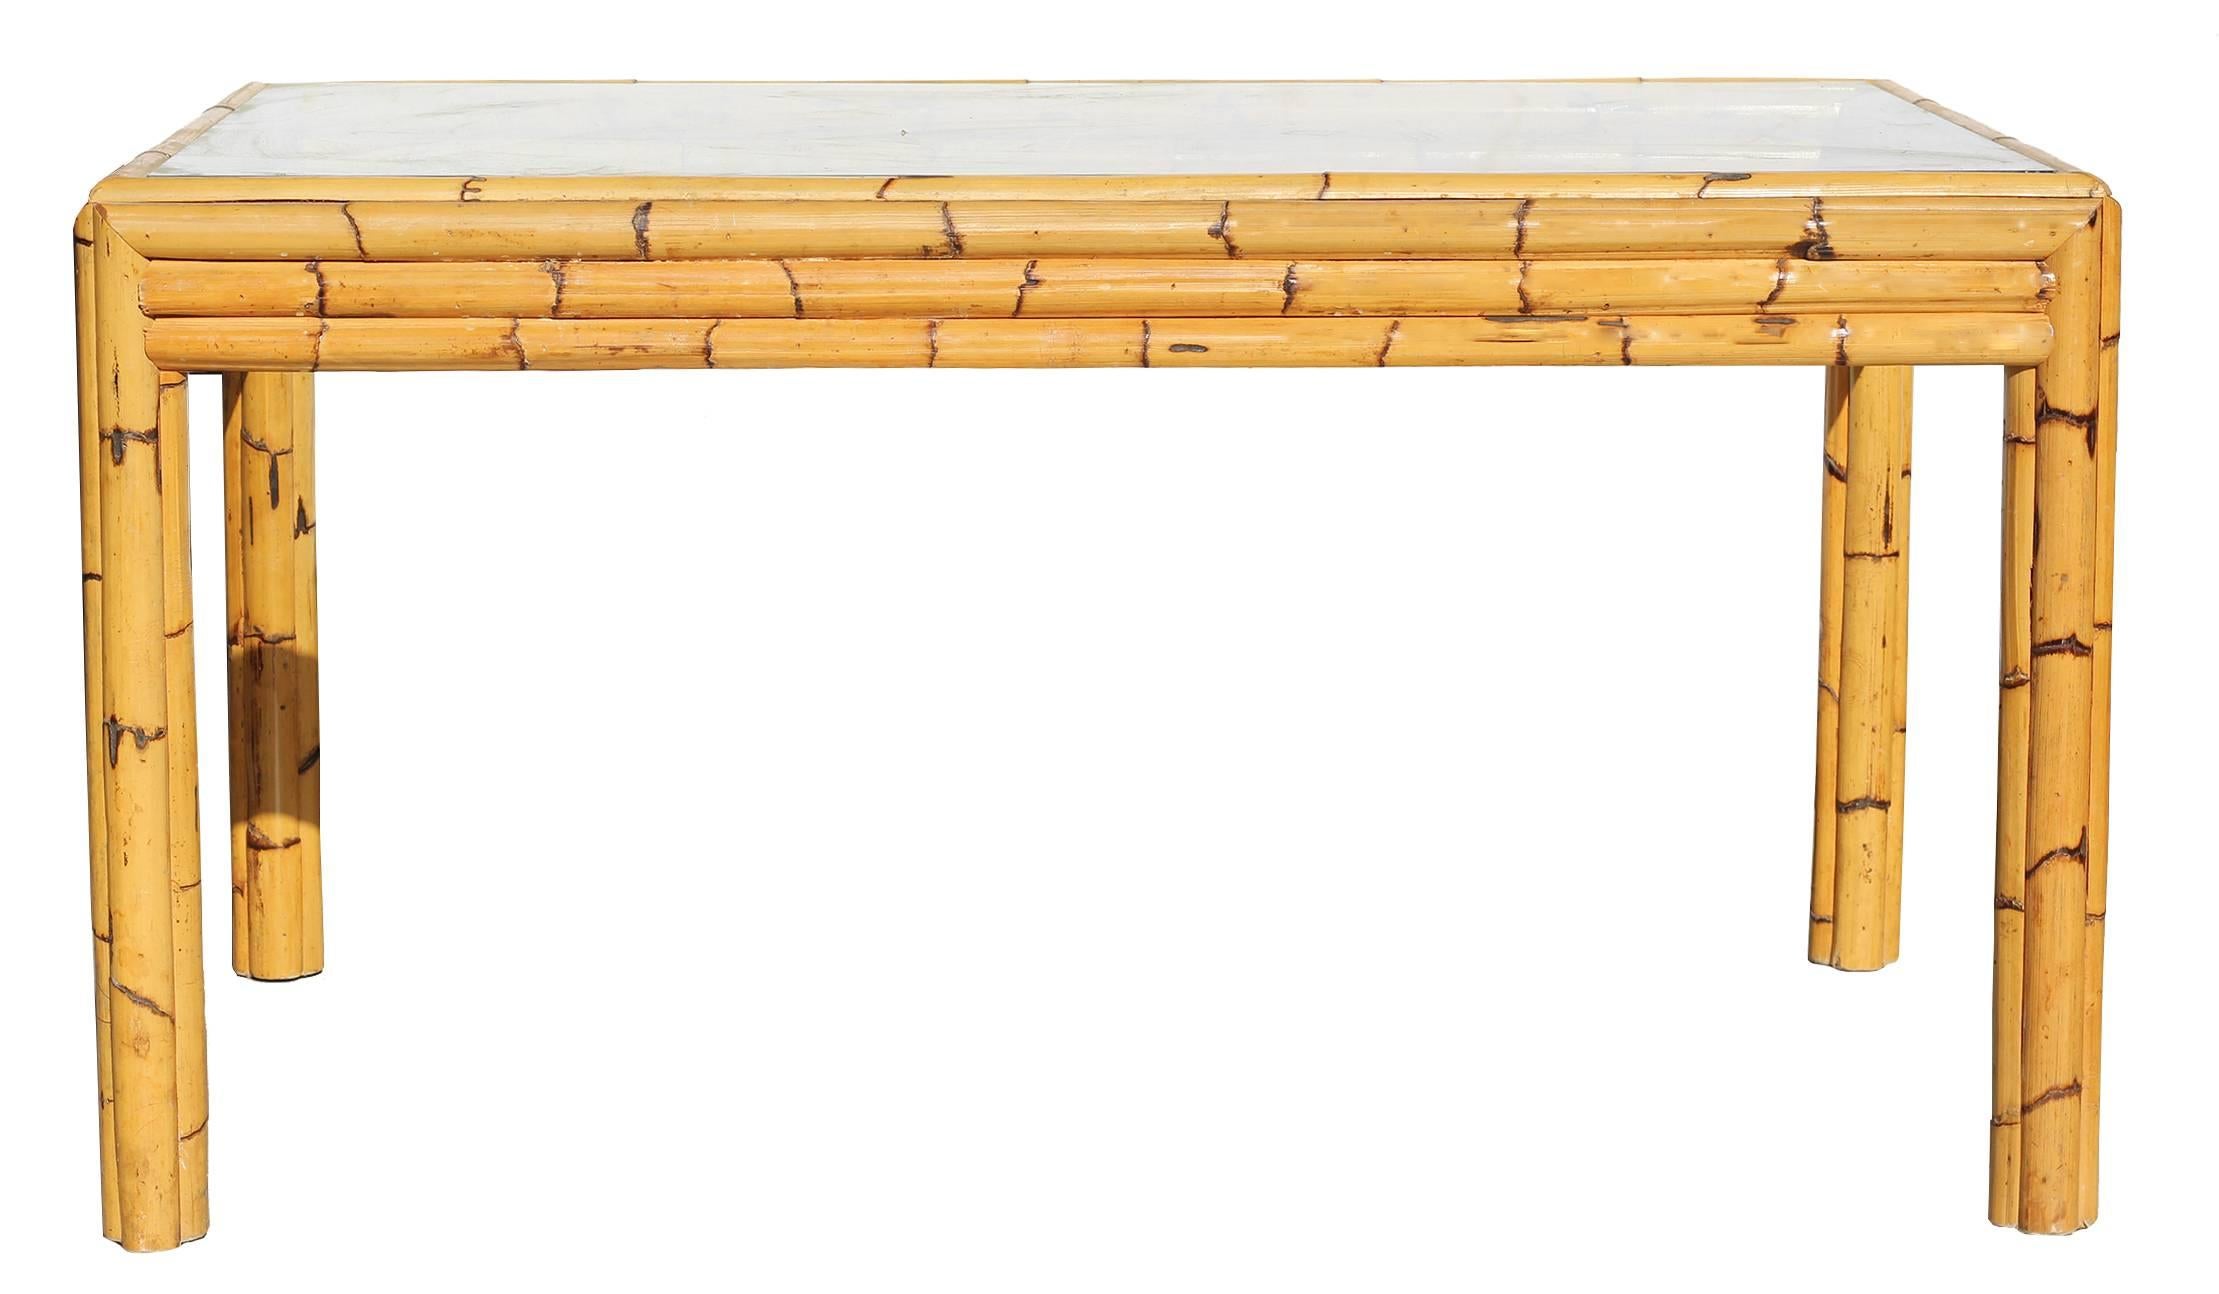 Thick and strong bamboo stalks give ample support for a dark smoked glass table top. 